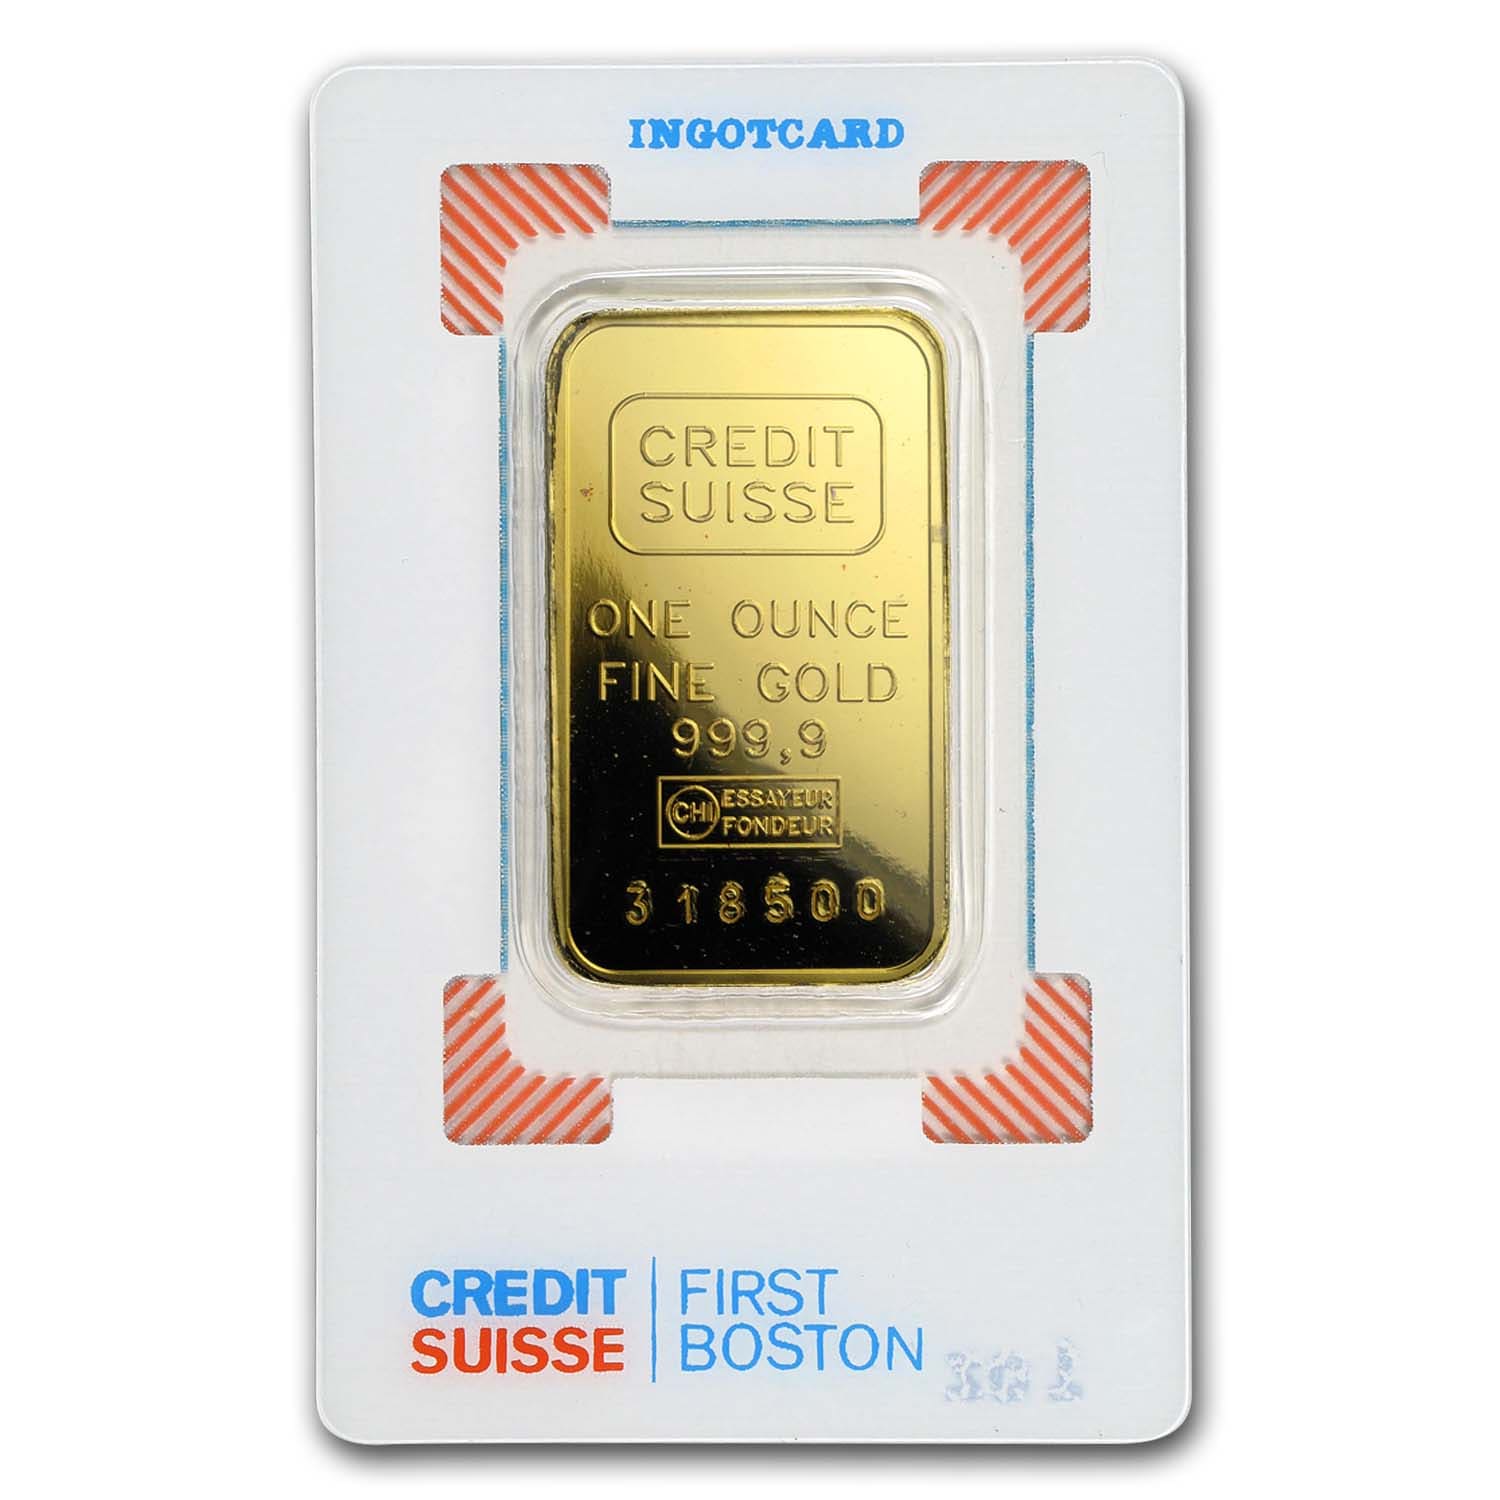 1 ounce credit suisse gold bar